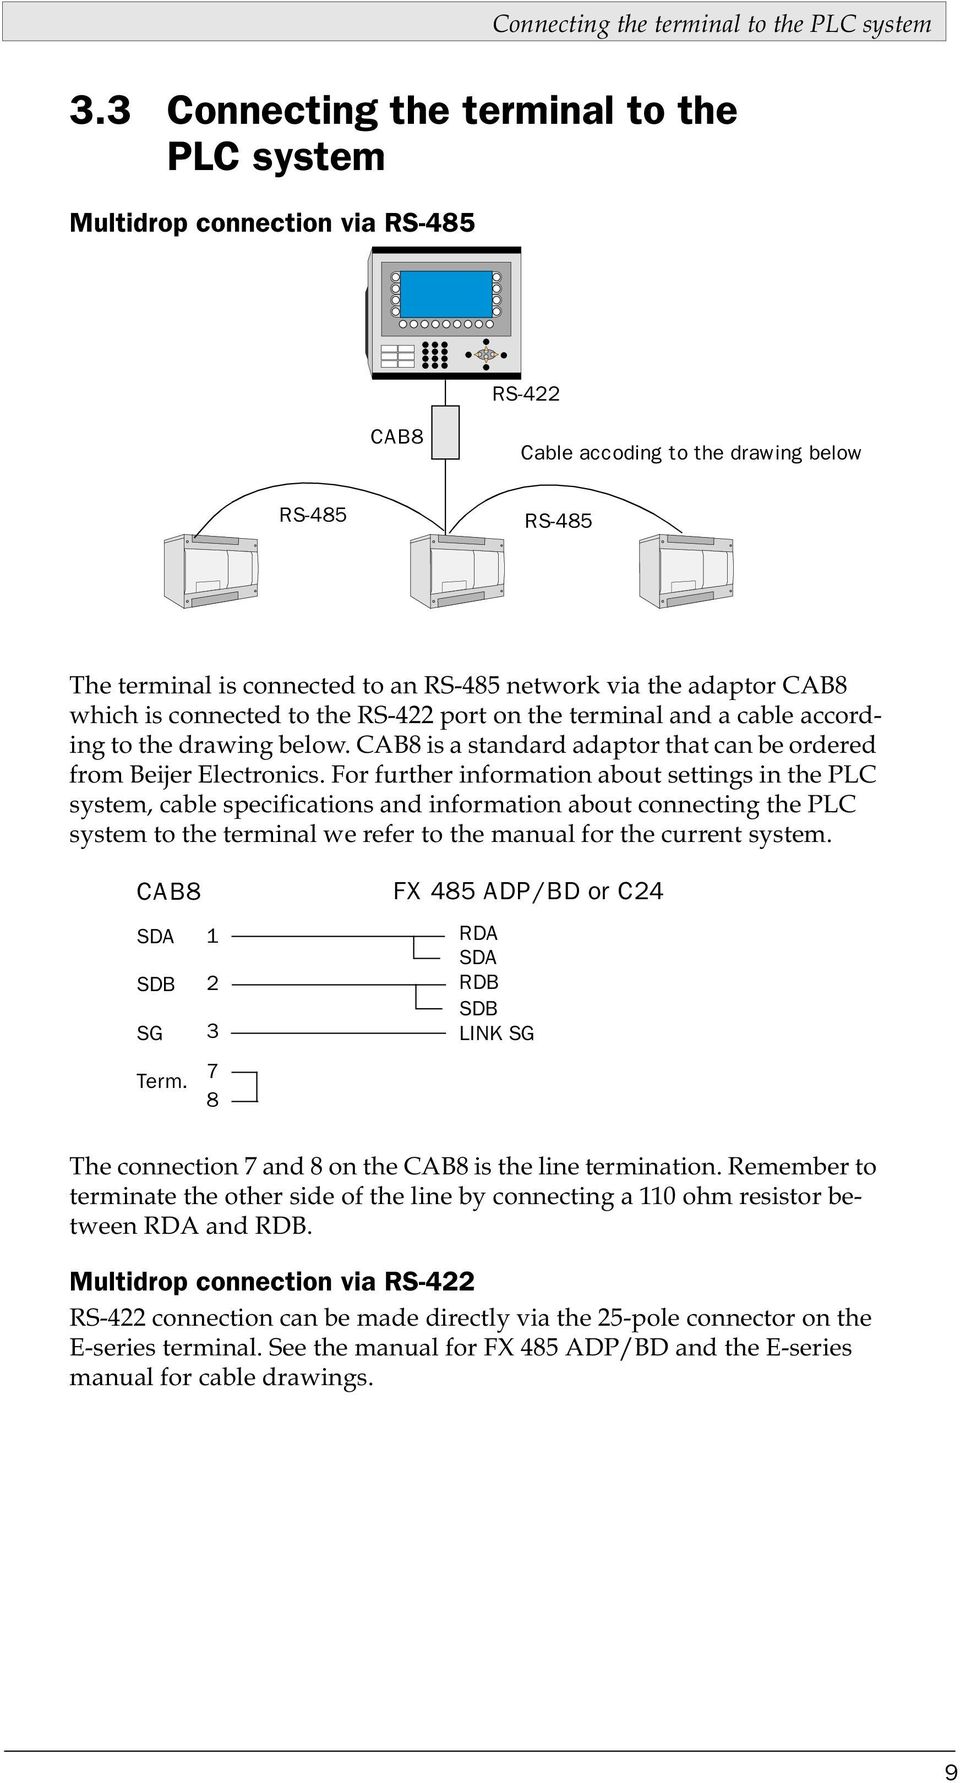 adaptor CAB8 which is connected to the RS-422 port on the terminal and a cable according to the drawing below. CAB8 is a standard adaptor that can be ordered from Beijer Electronics.